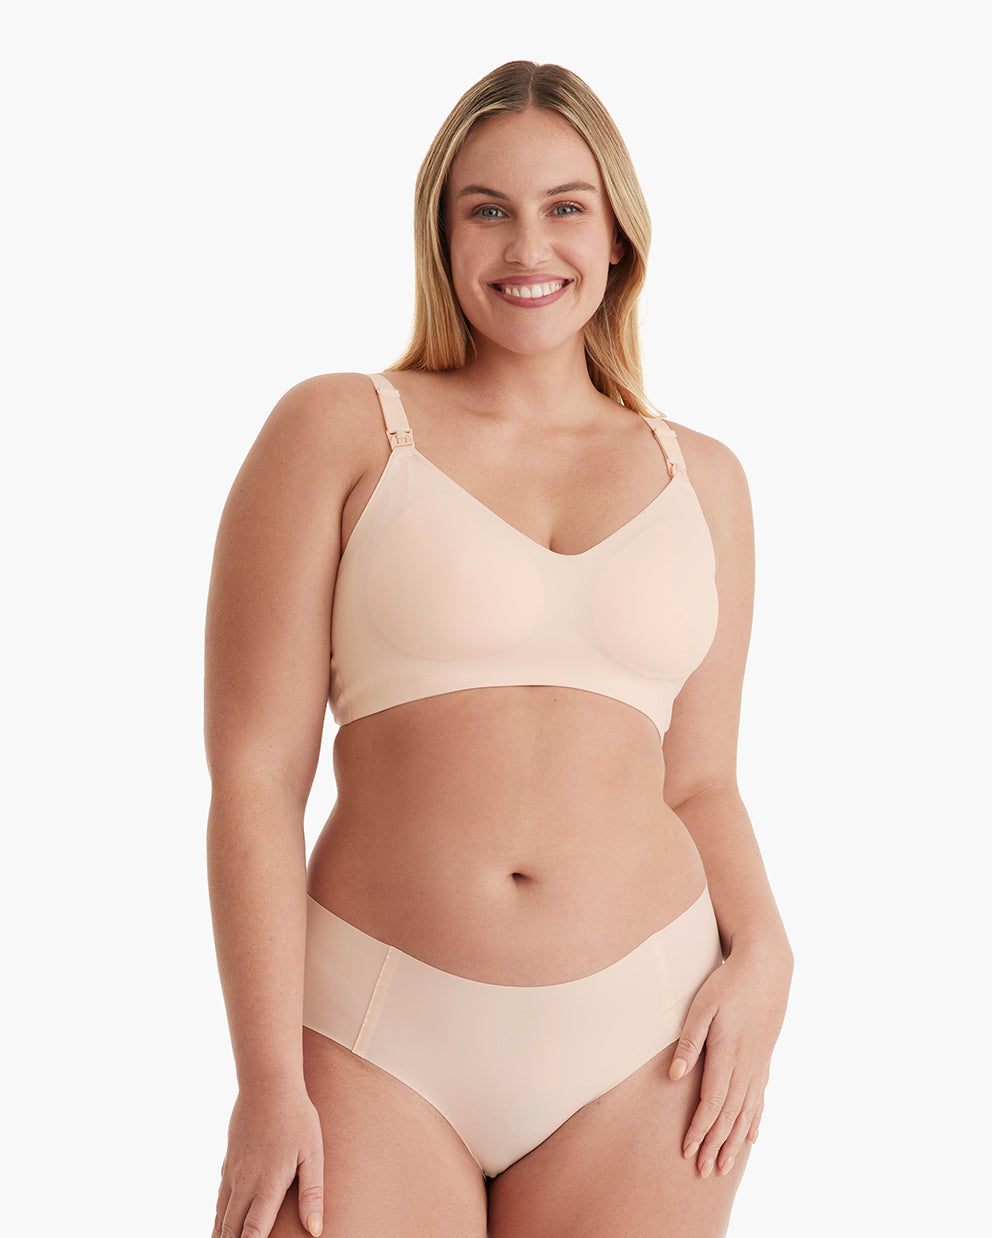 Get Cozy with Momcozy's Maternity Bra Sale: Extended  Prime Day  Discounts Up to 50% Off